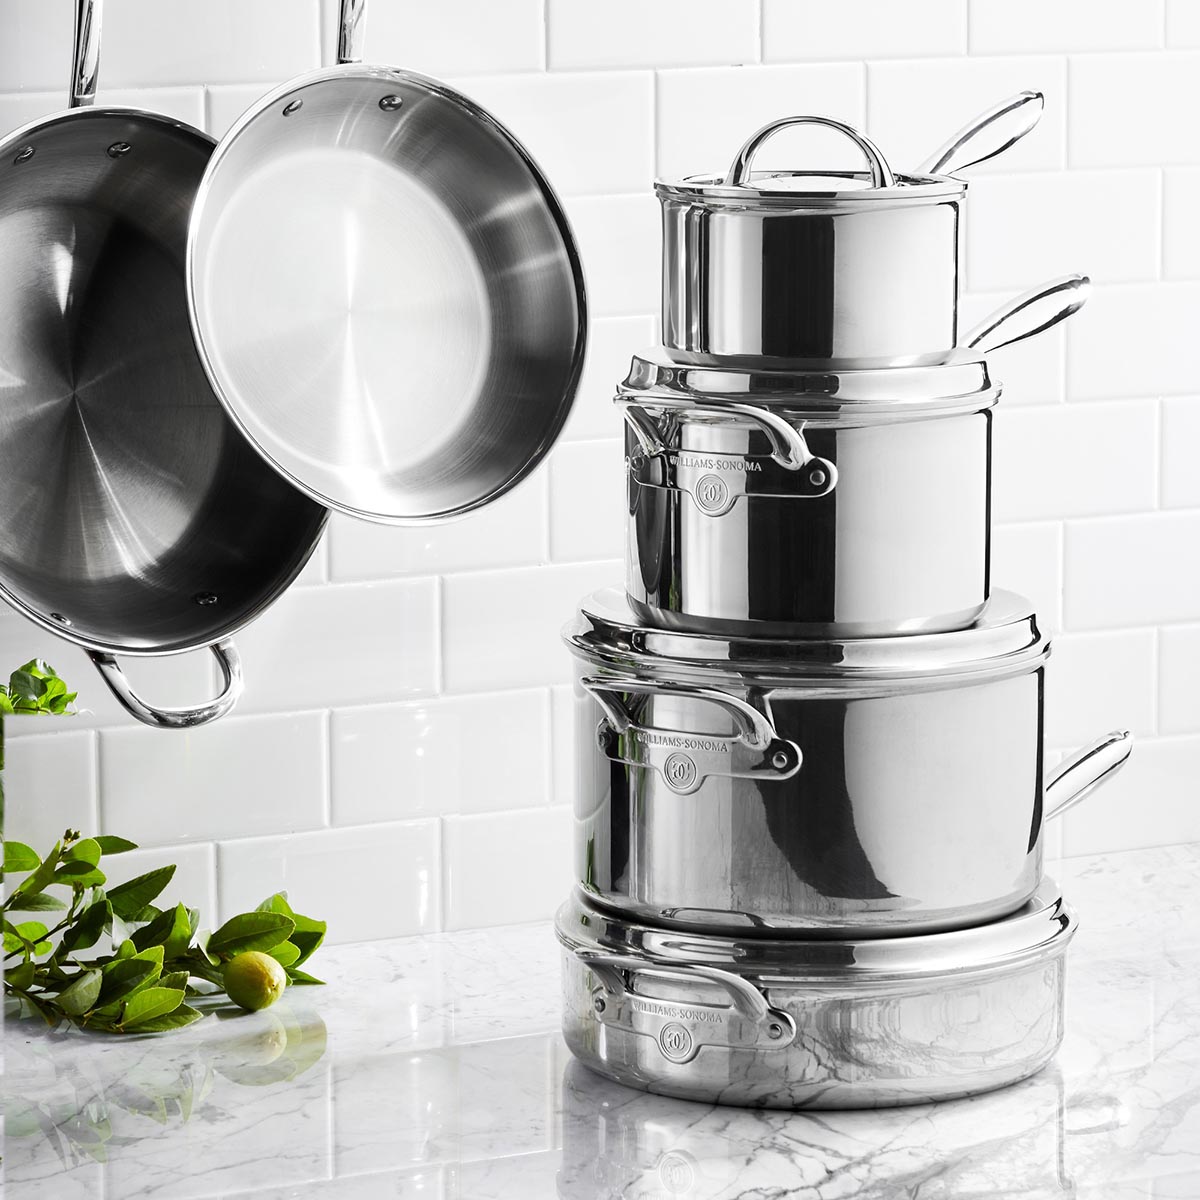 The Best Things to Buy in November Option Cookware